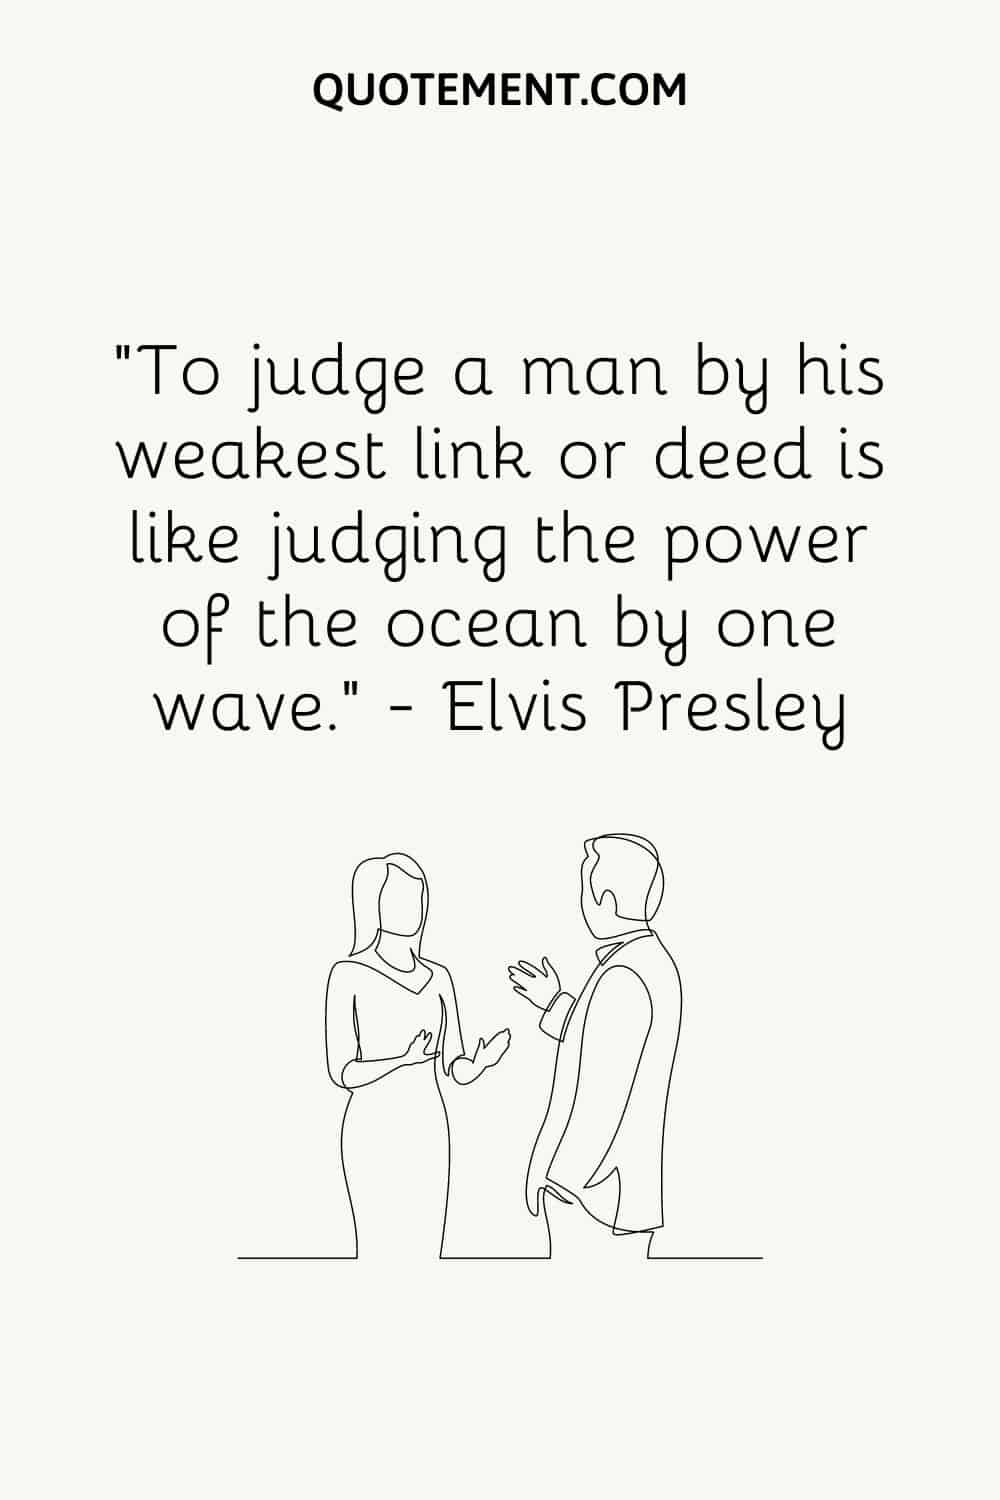 “To judge a man by his weakest link or deed is like judging the power of the ocean by one wave.” — Elvis Presley